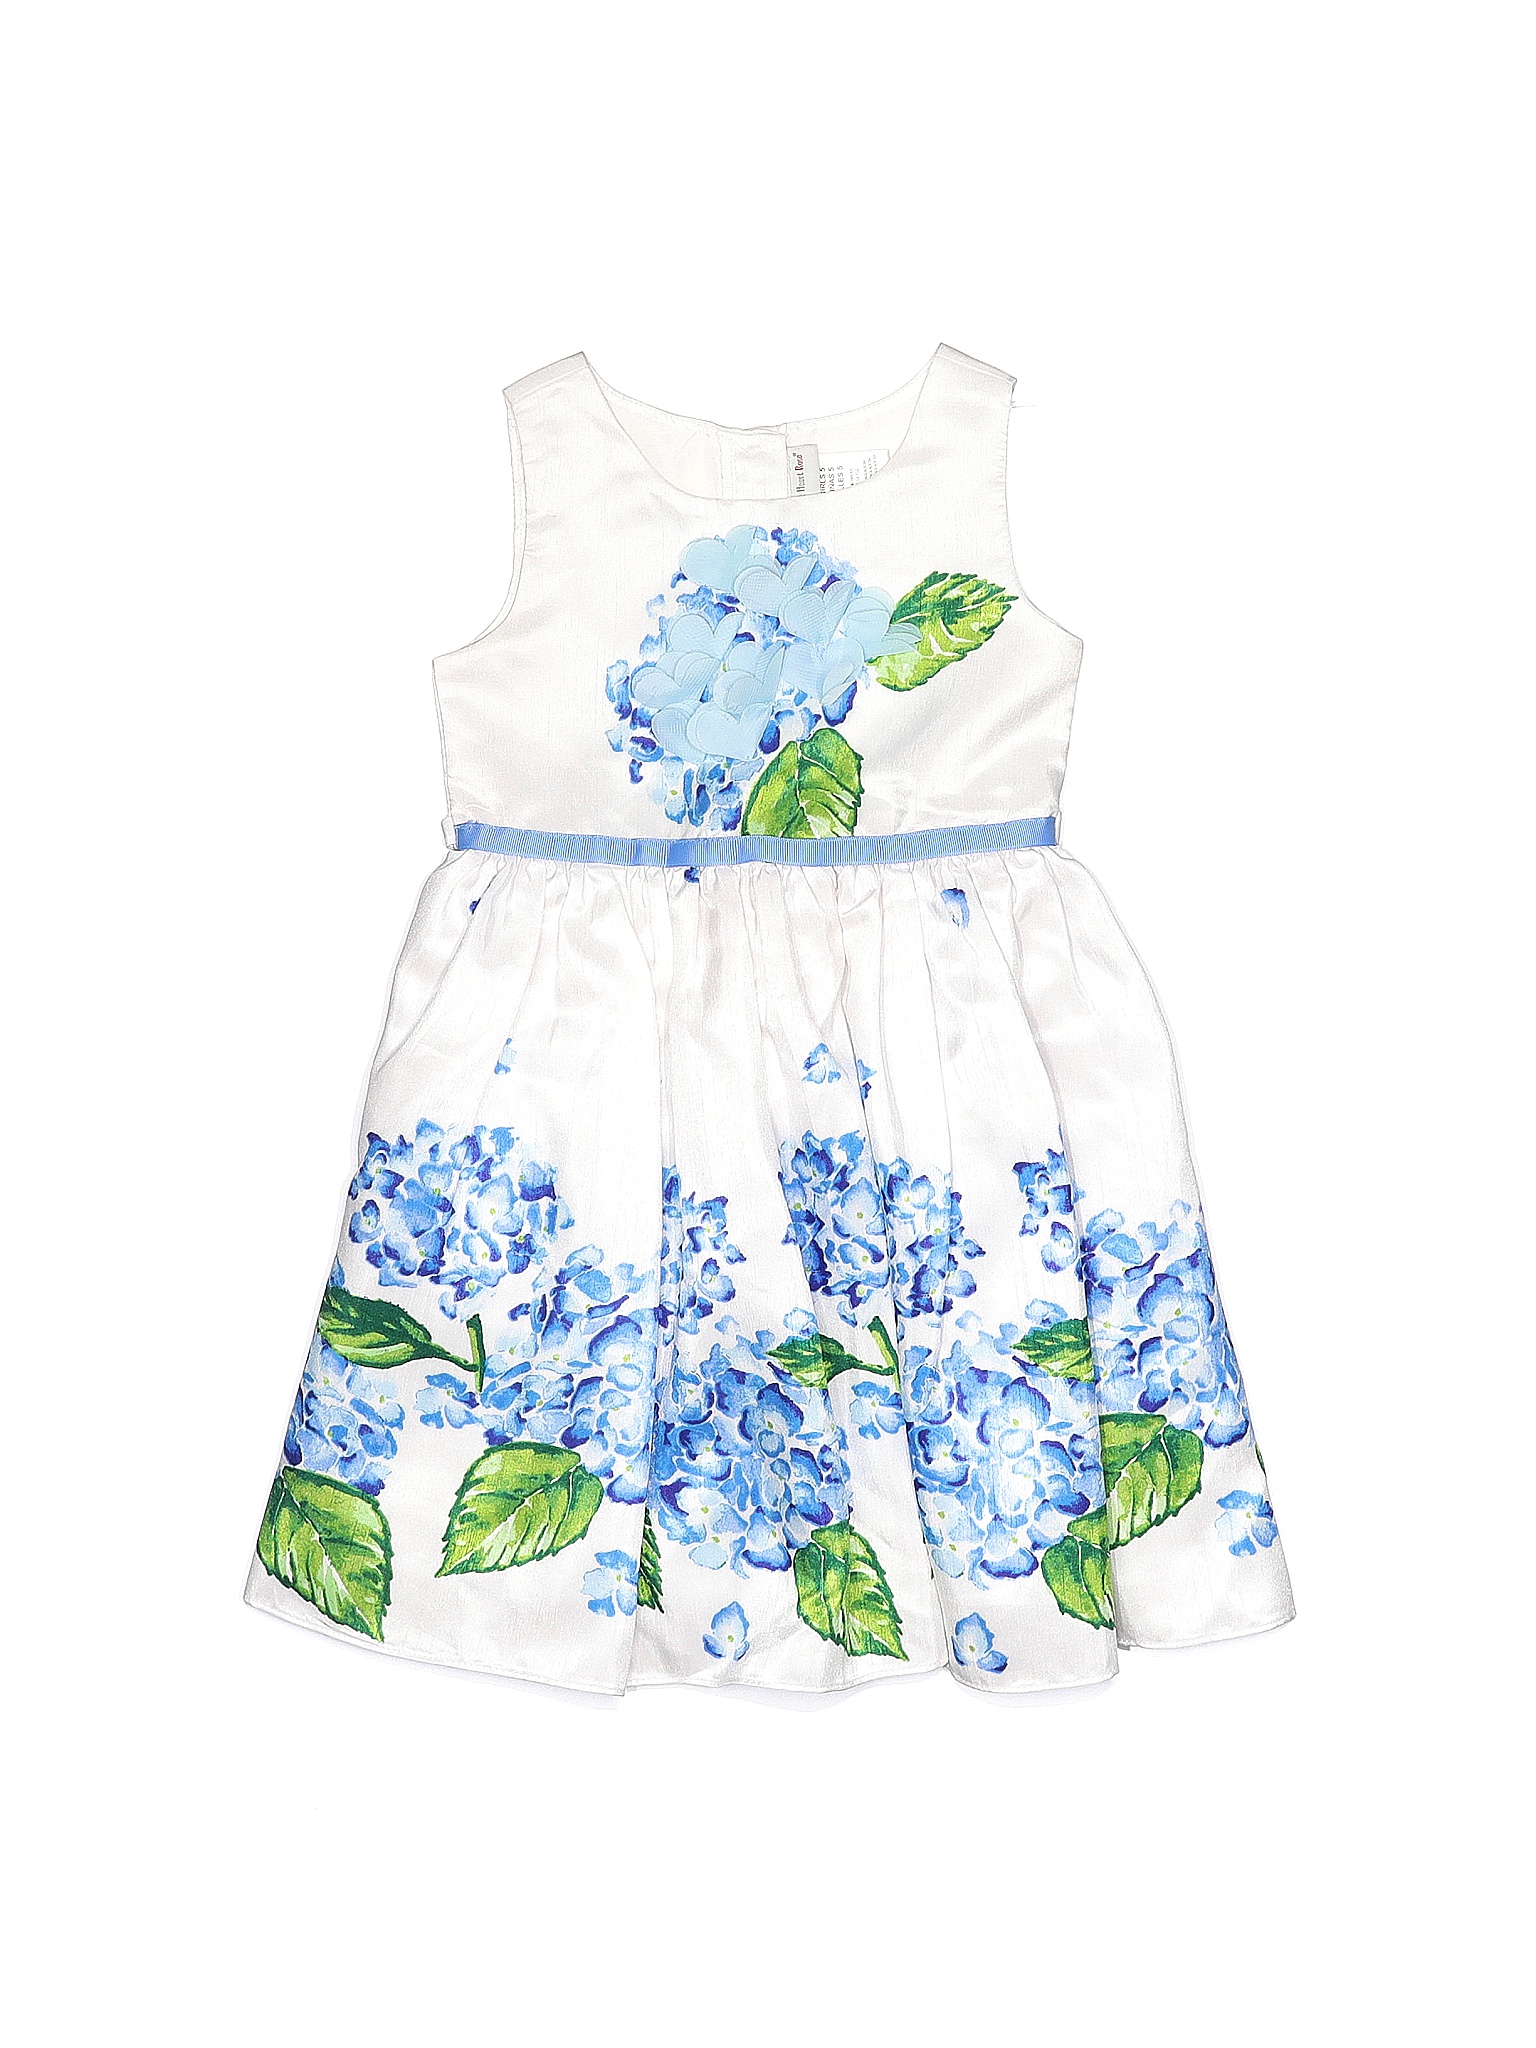 Sweet Heart Rose Girls' Clothing On Sale Up To 90% Off Retail | thredUP